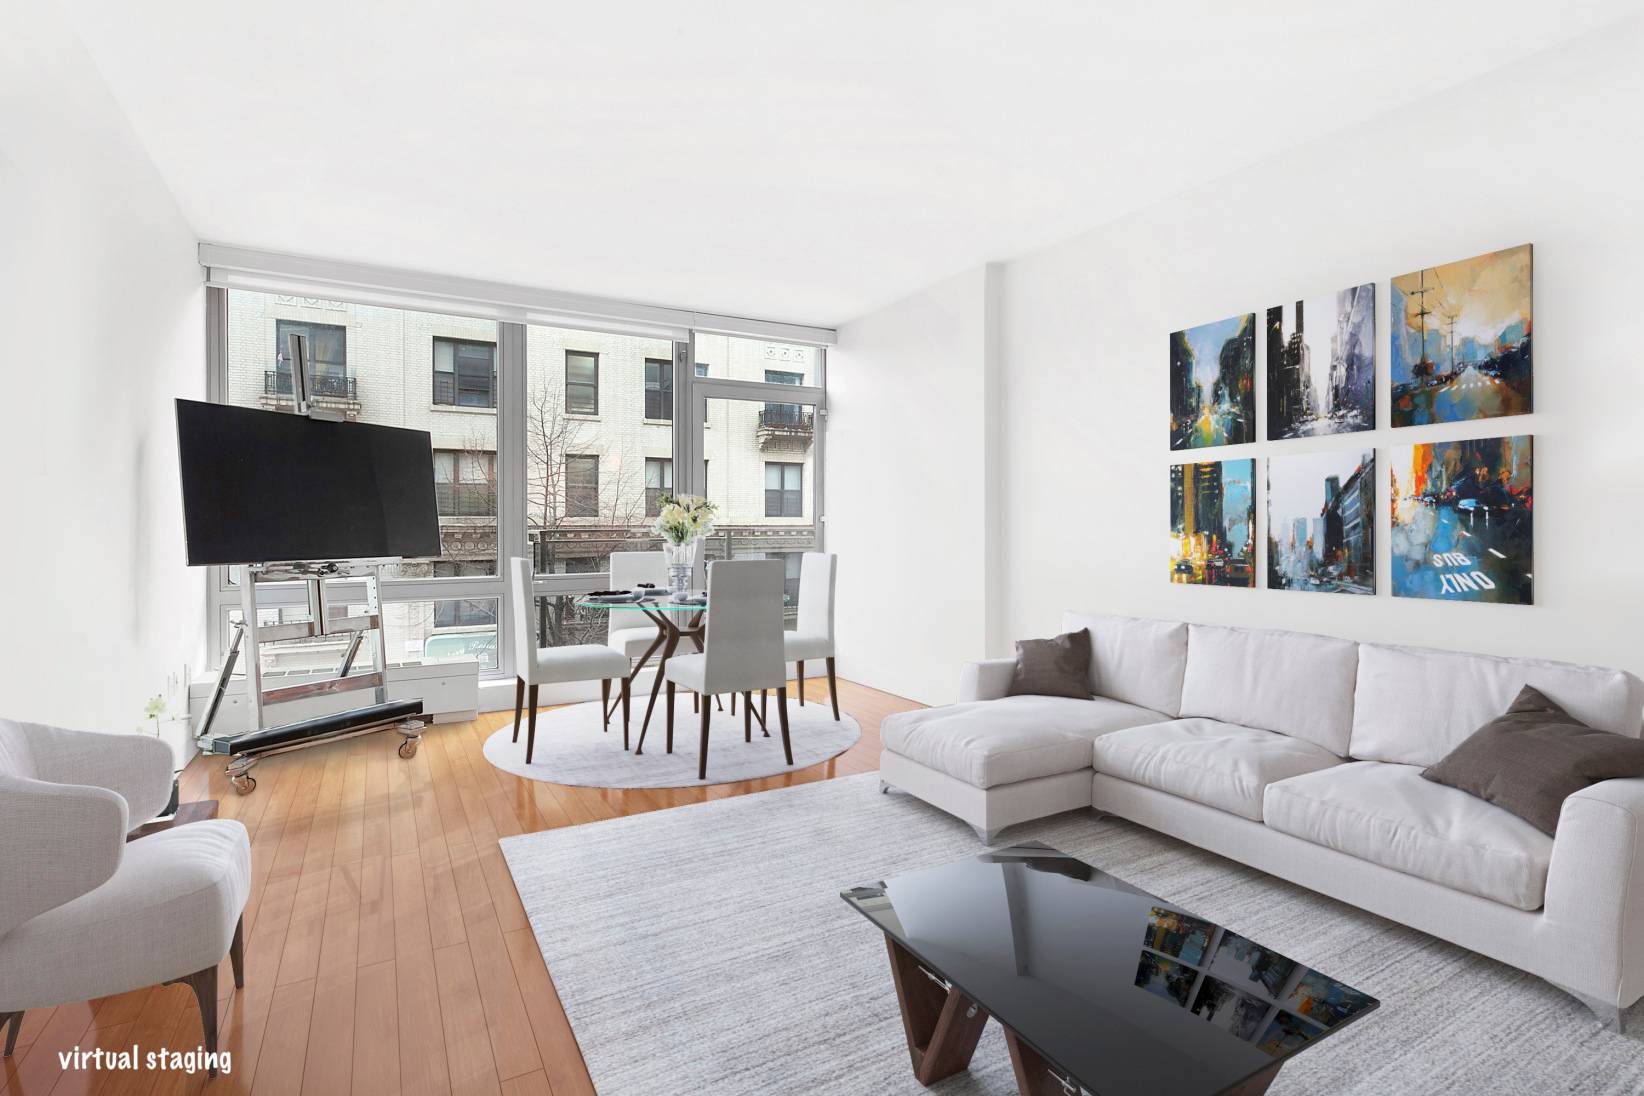 117 West 123rd Street is conveniently and centrally located in South Harlem, making it easily accessible within NYC as well as an easy escape out of the city for weekend ...